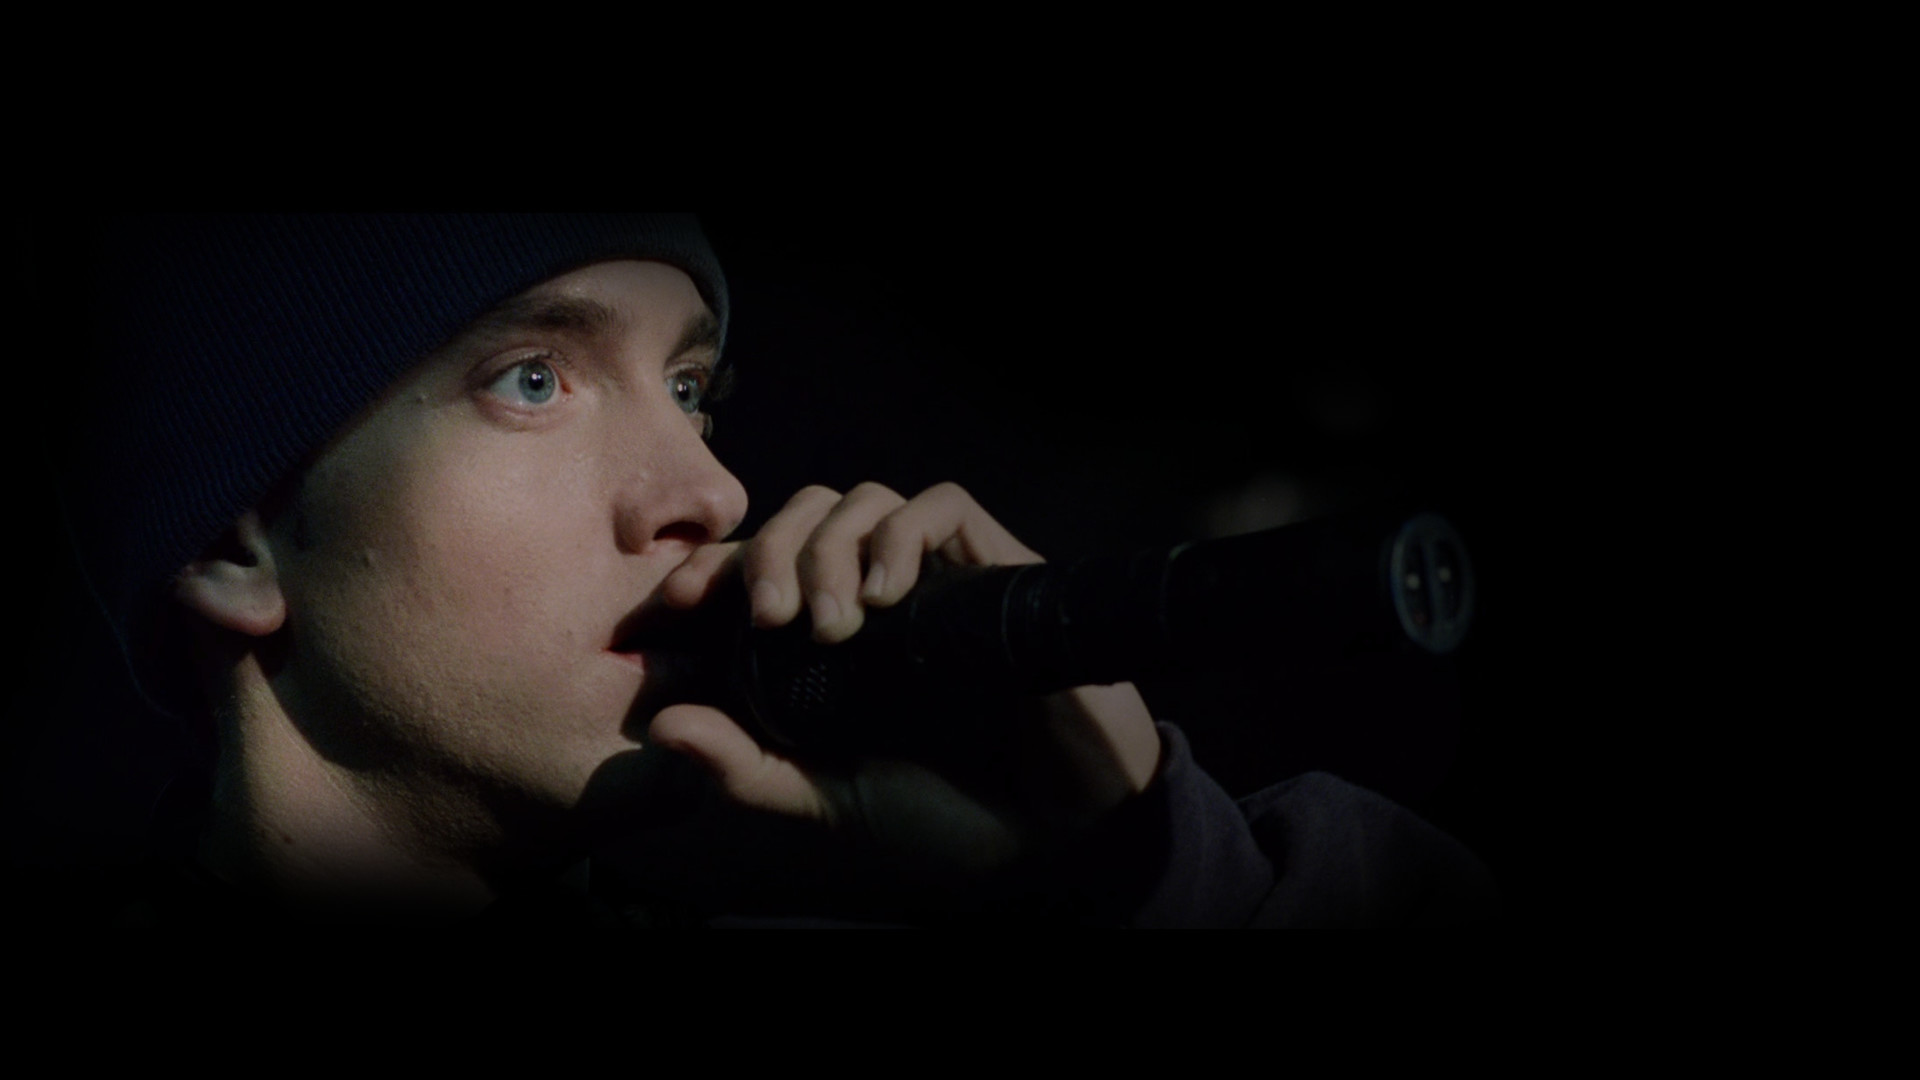 1920x1080 ... EMINEM images 8 Mile wallpaper and background photos (6942595) ...